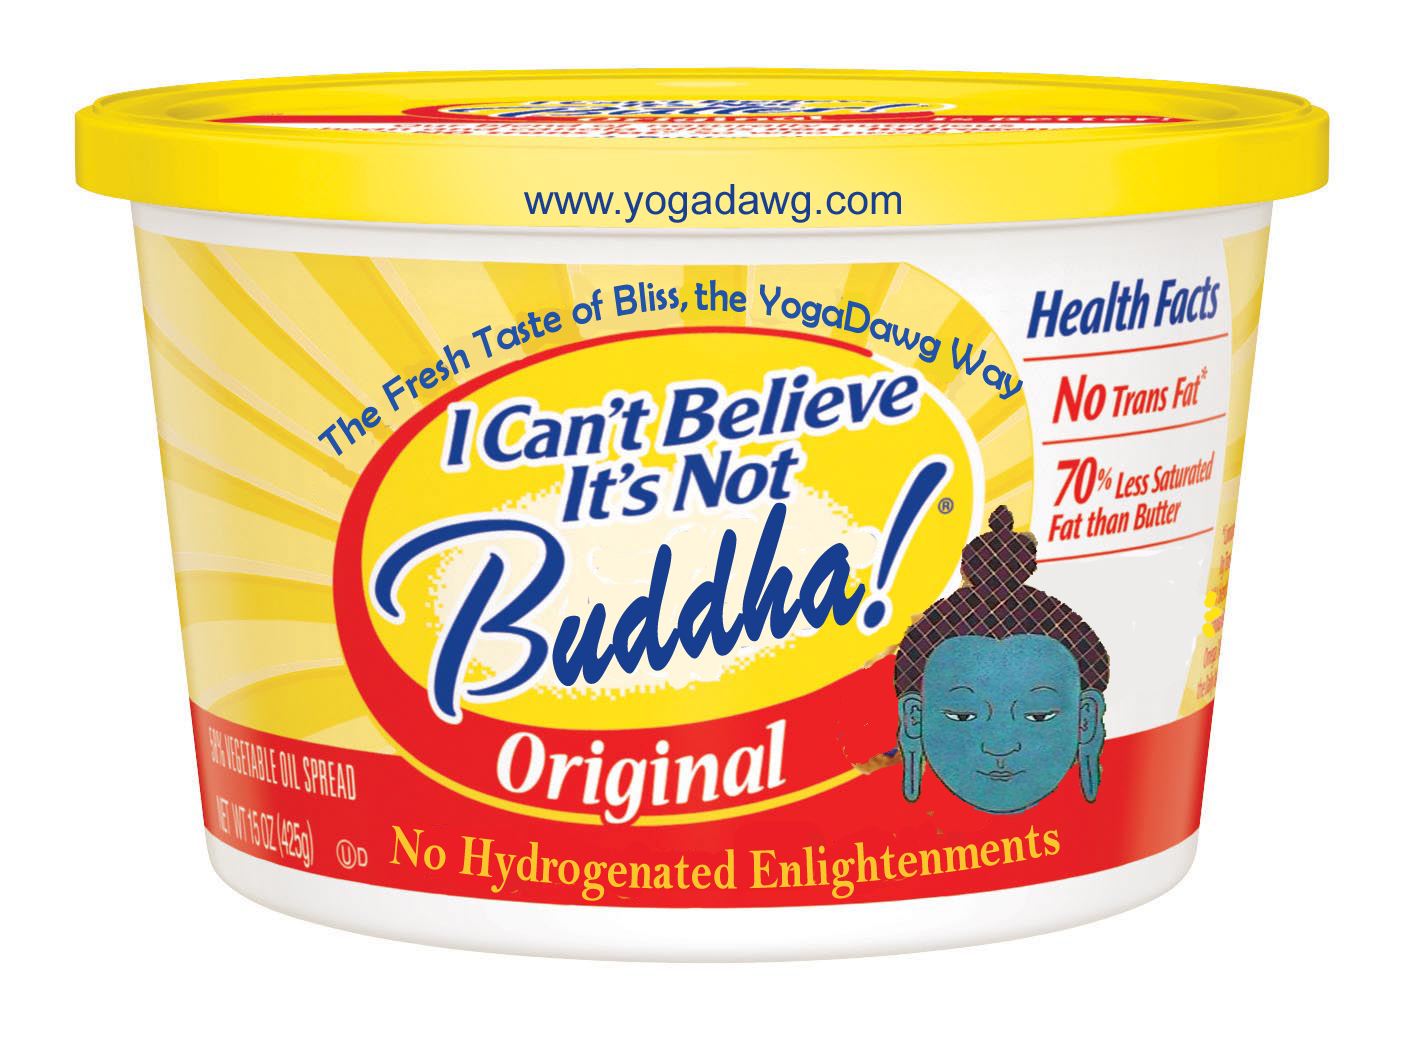 I Can't BVelieve It's Not Buddha